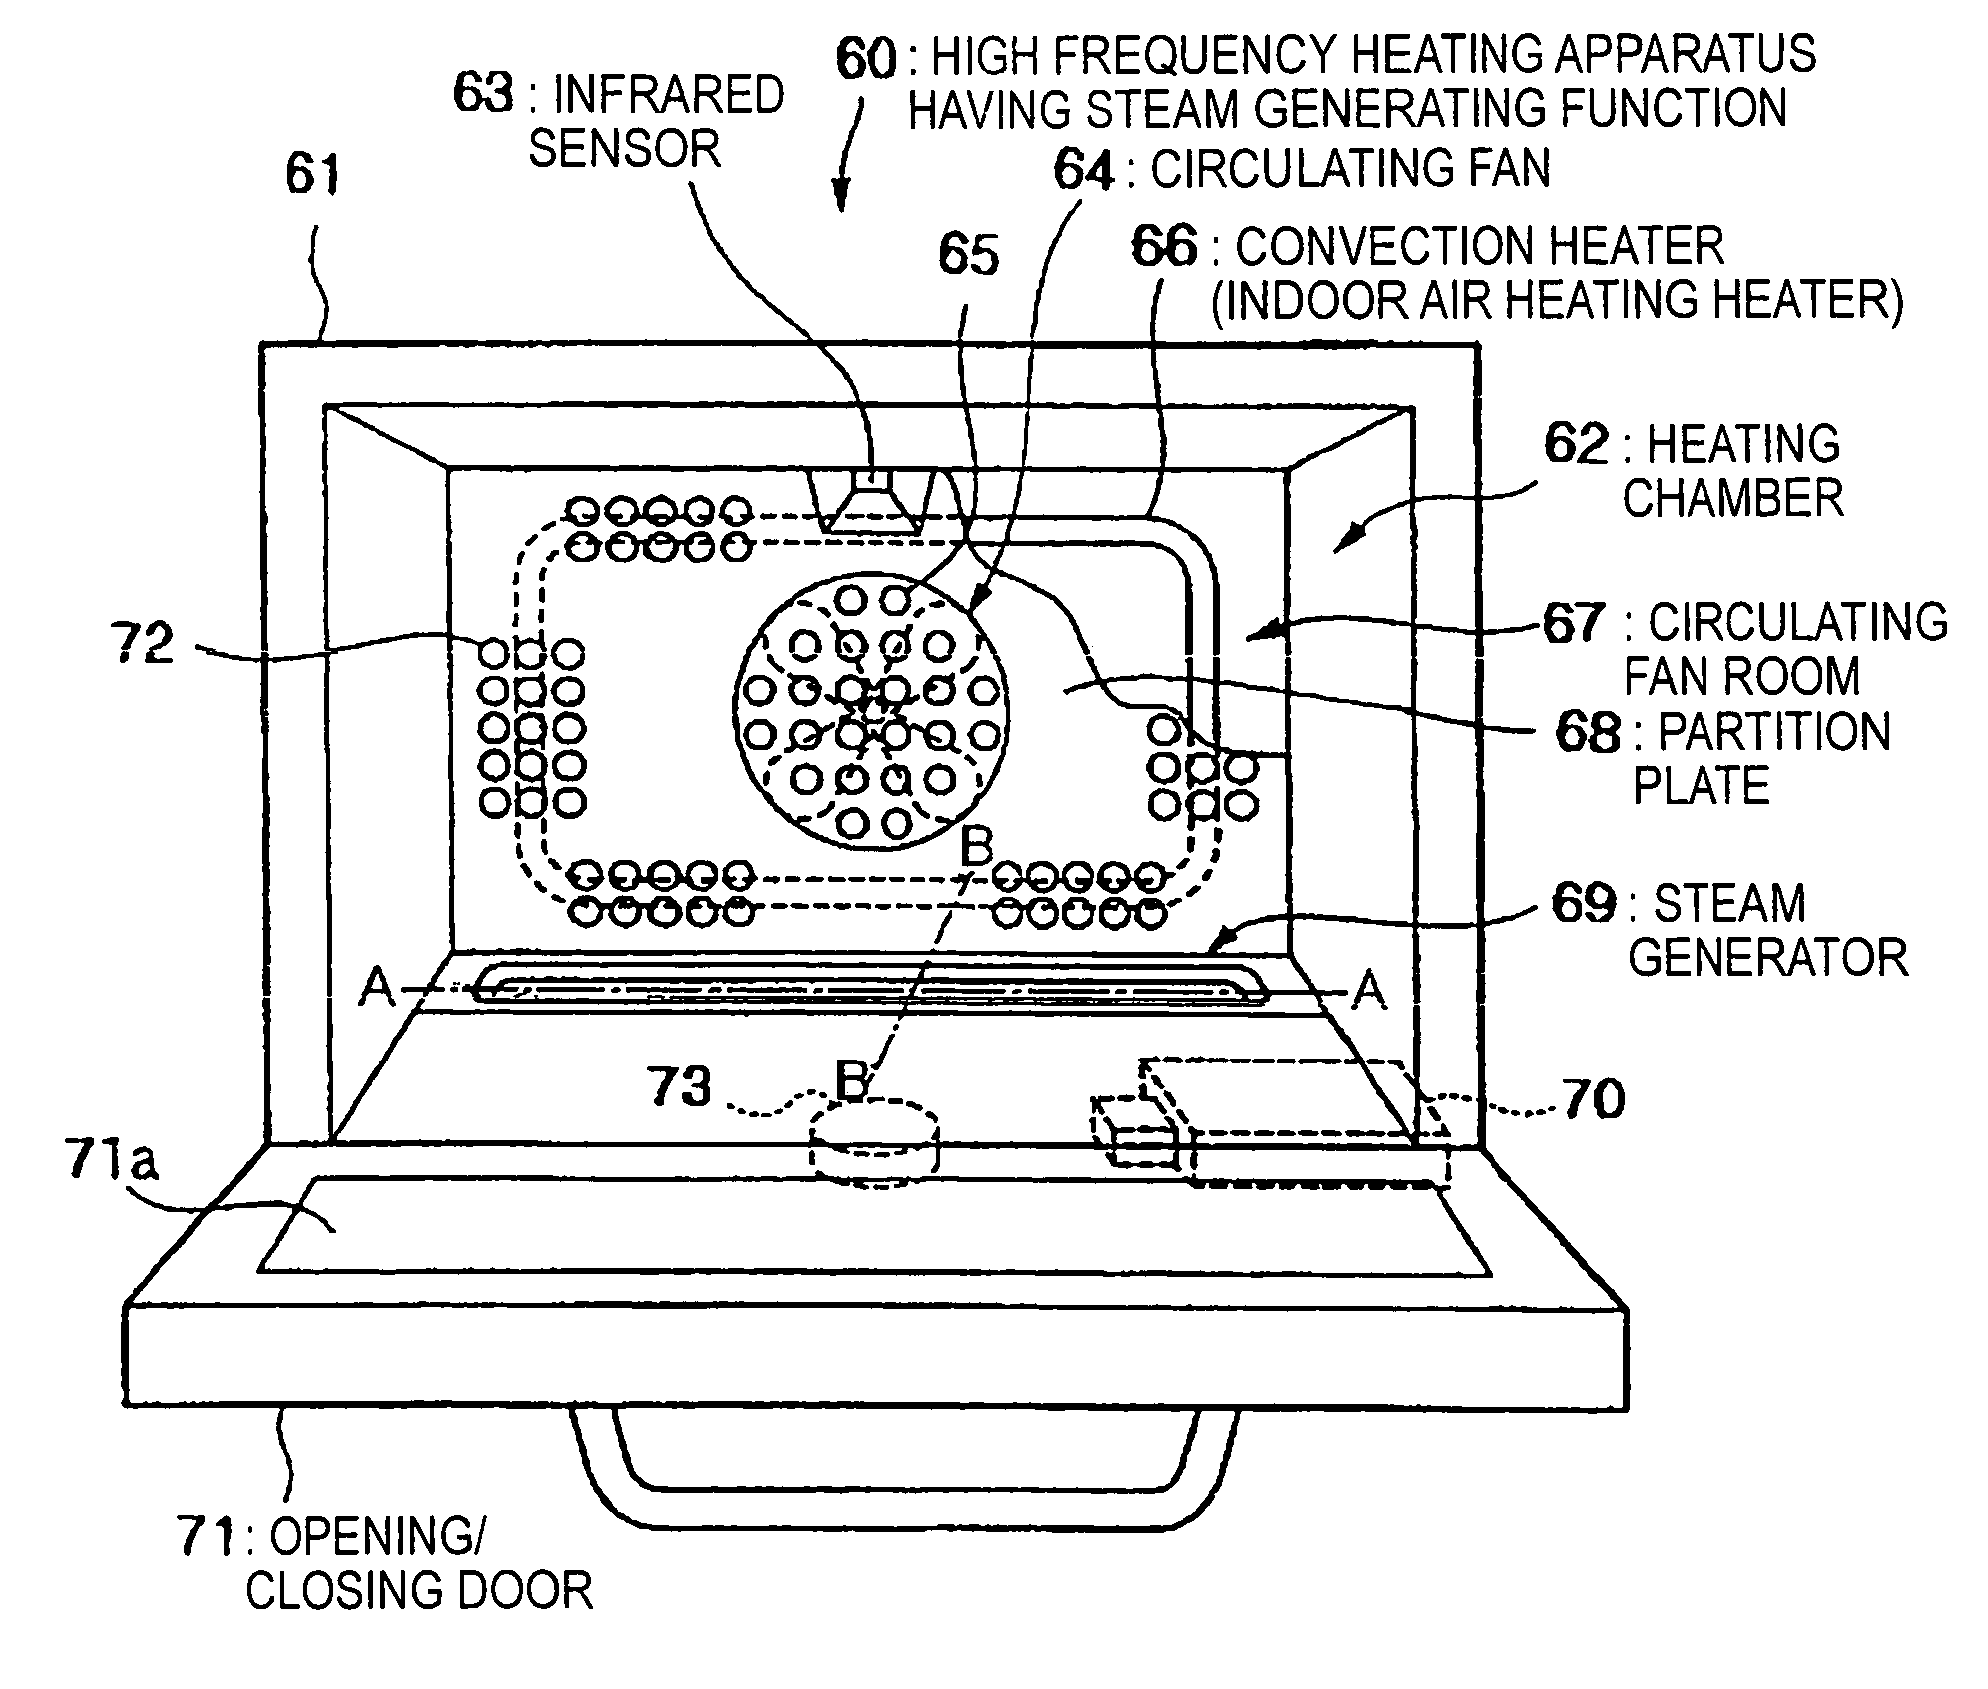 Steam generation function-equipped high-frequency heating device